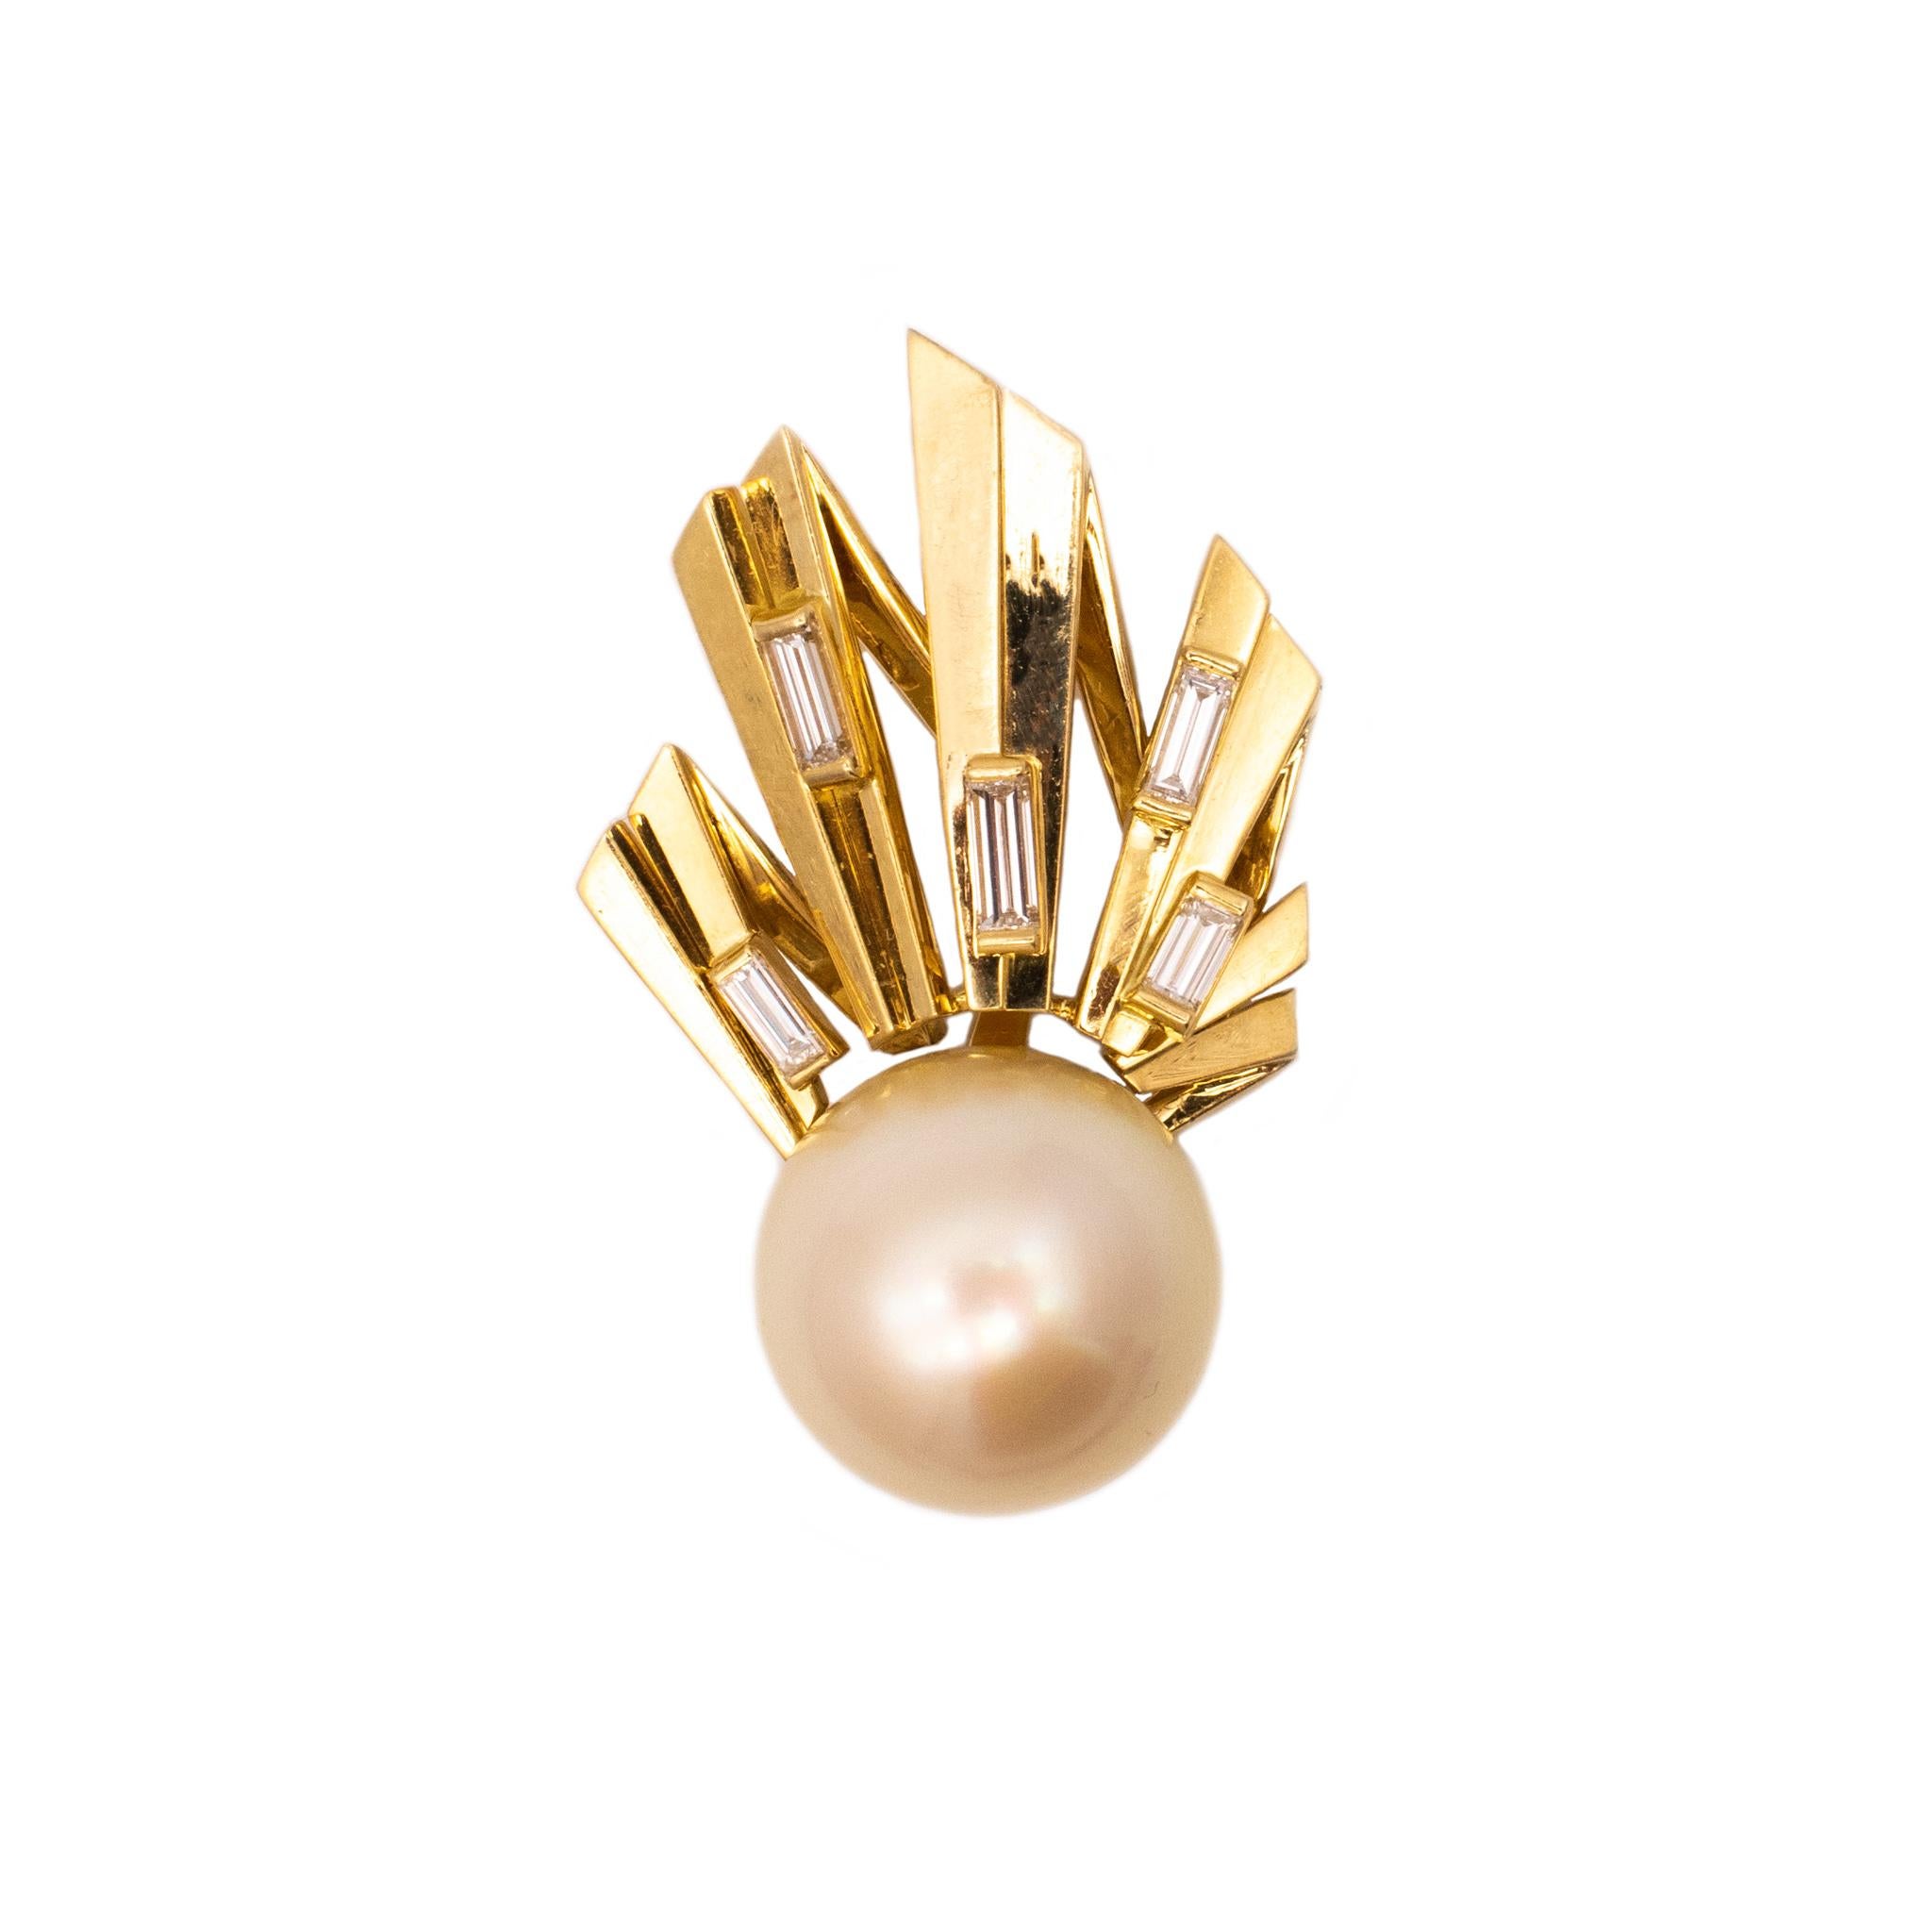 Geometric pendant with large South Sea pearl and diamonds.

A modernist European piece crafted in solid yellow gold of 18 karats, with high polish finish. This geometric spiky pendant is completely assembled piece by piece and is embellished with a